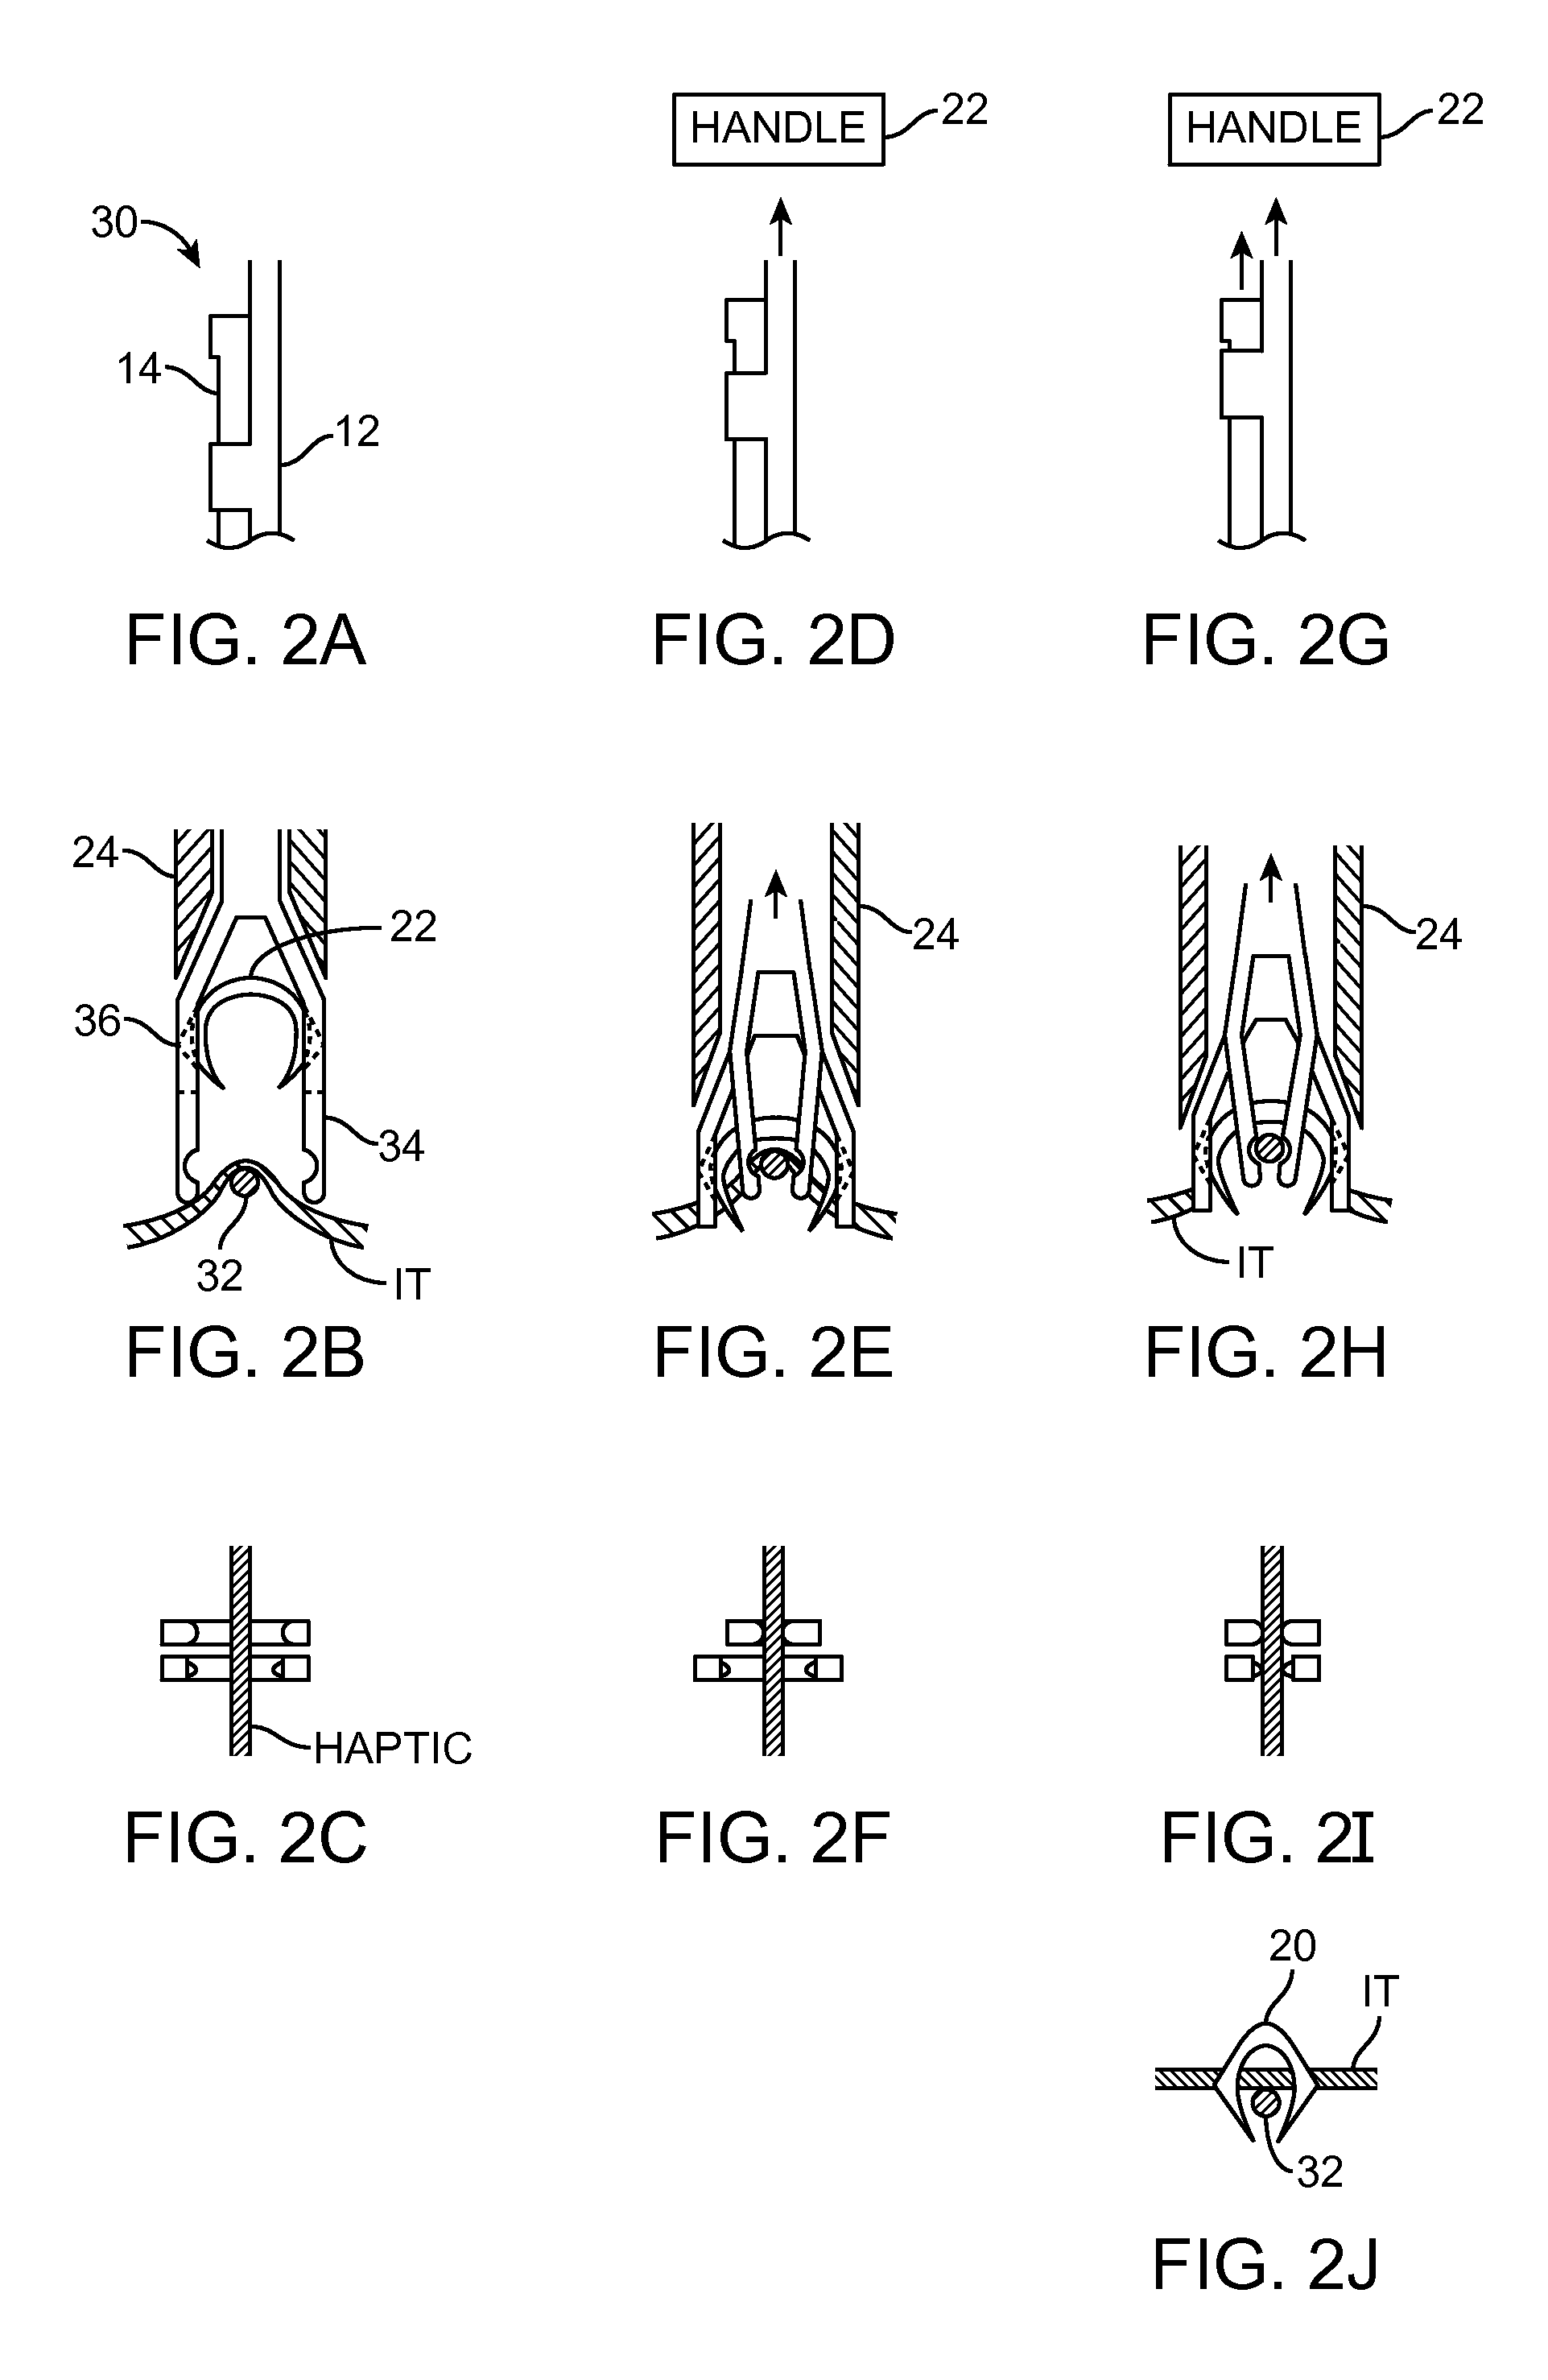 Fasteners, deployment systems, and methods for ophthalmic tissue closure and fixation of ophthalmic prostheses and other uses